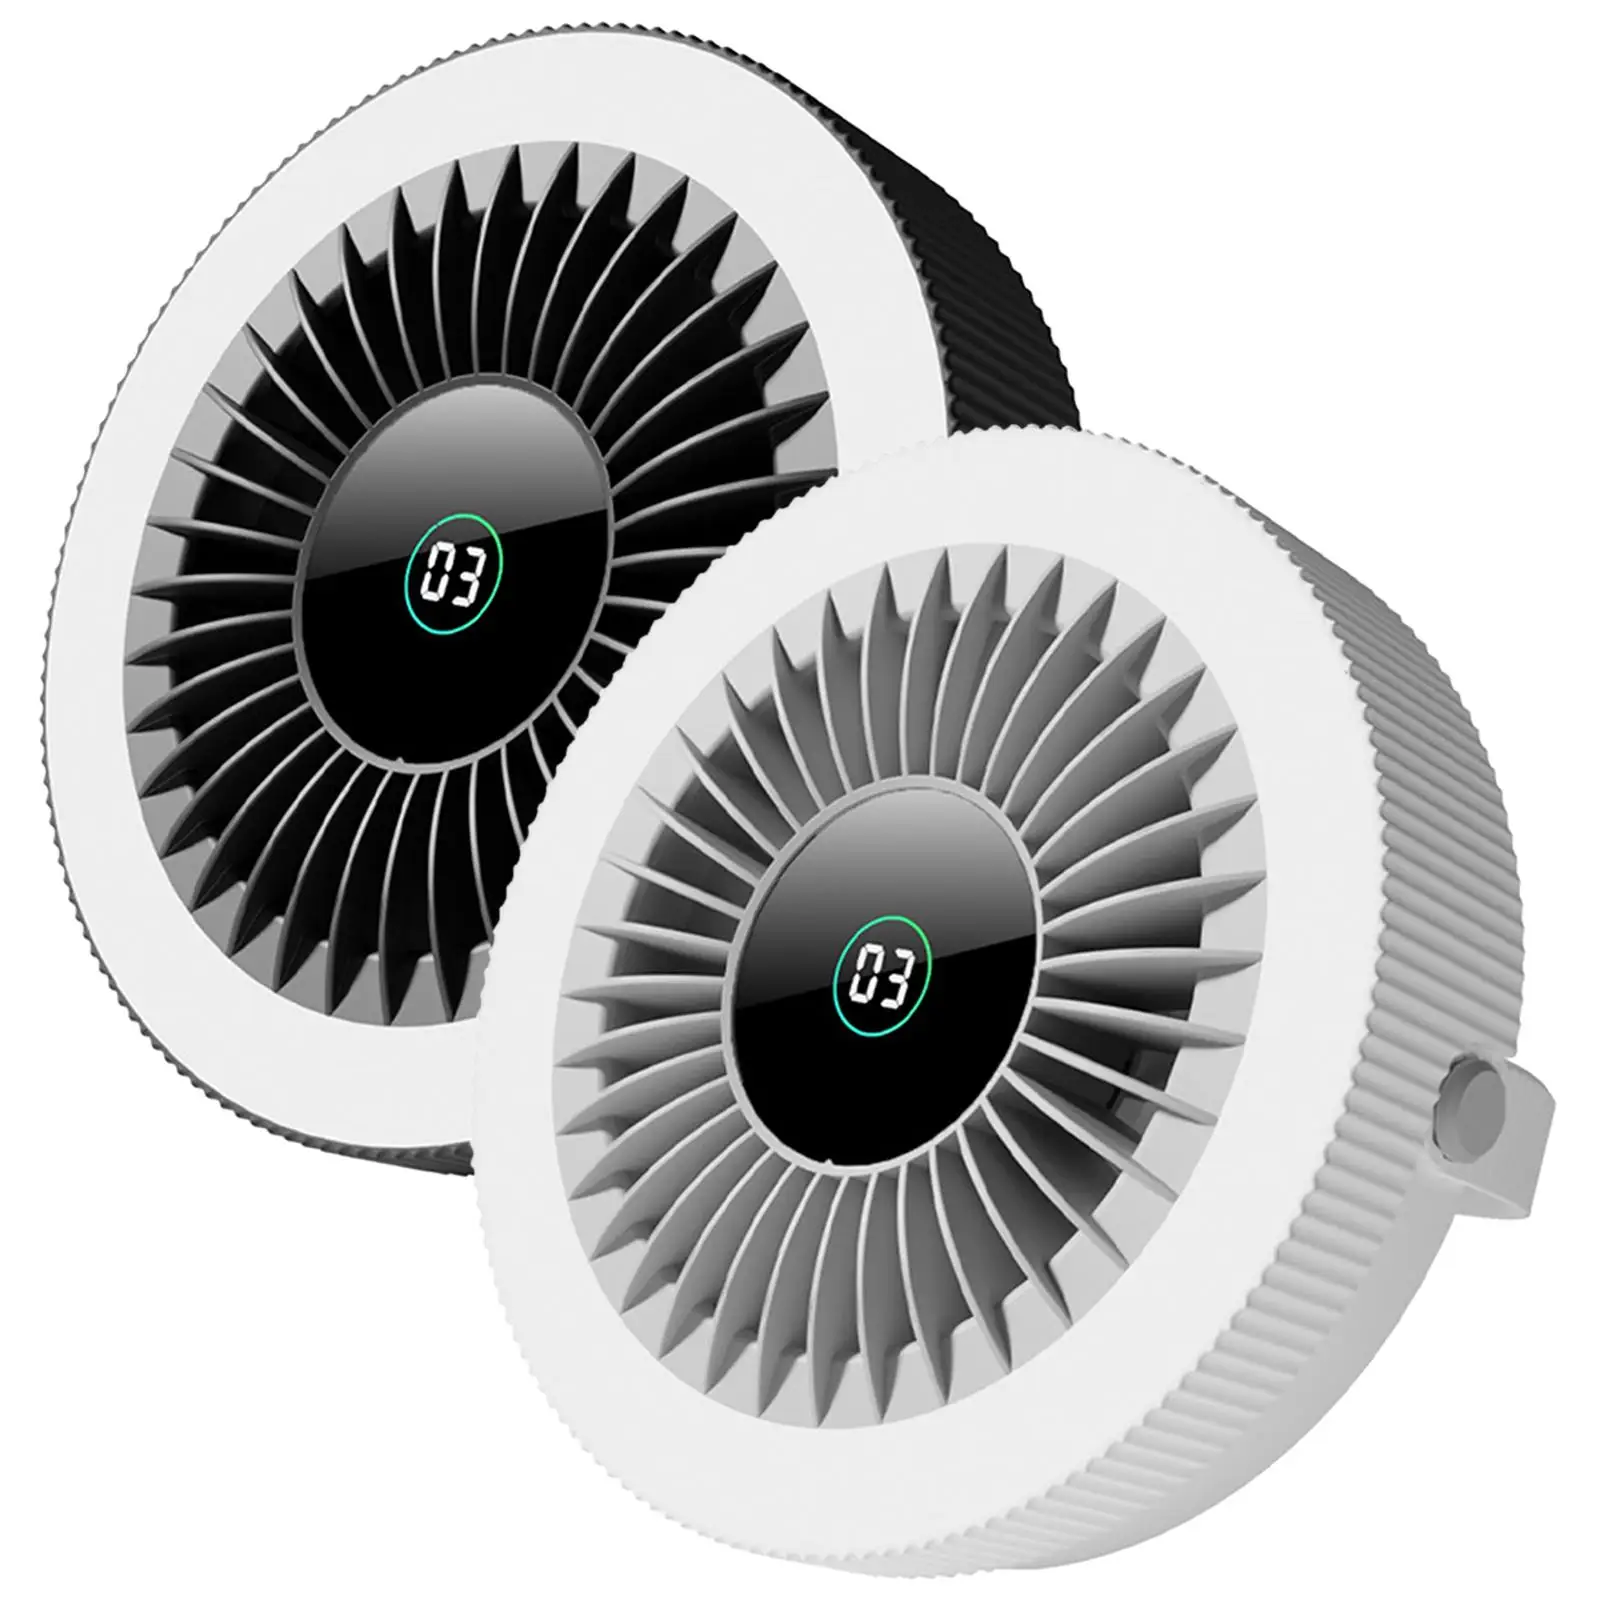 Portable Air Circulator Fan Outdoor Camping Ceiling Fan Rechargeable 3 Speed